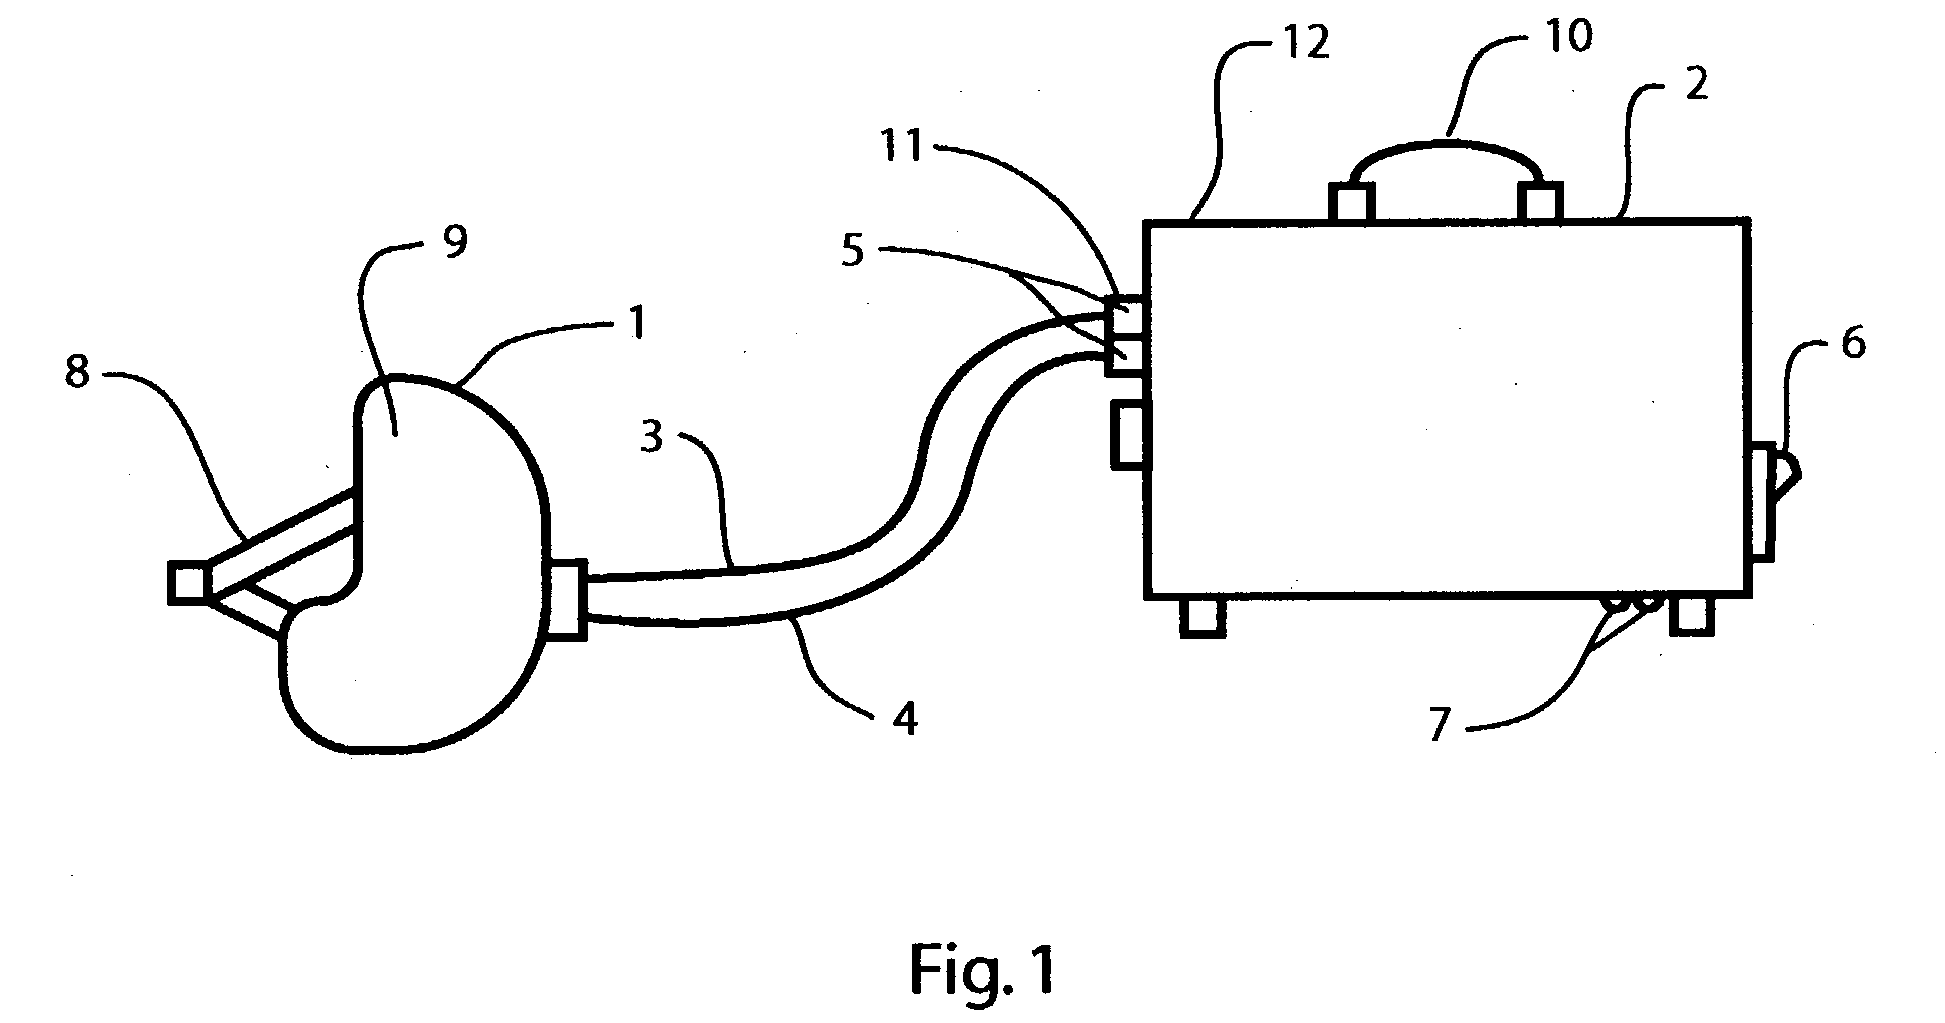 Method and device for rapidly inducing hypothermia